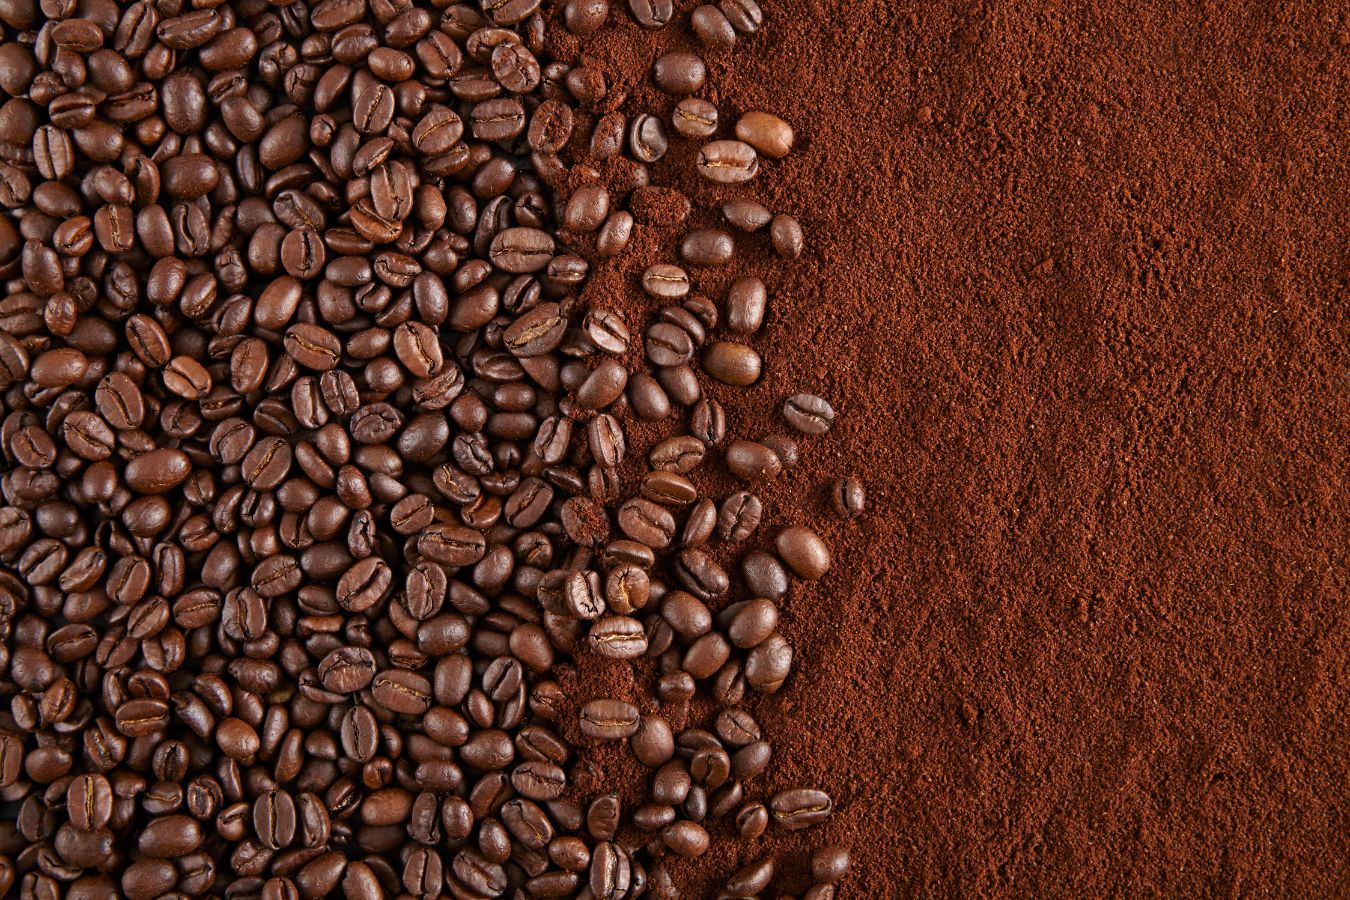 6 Ways To Grind Coffee Beans Without A Grinder